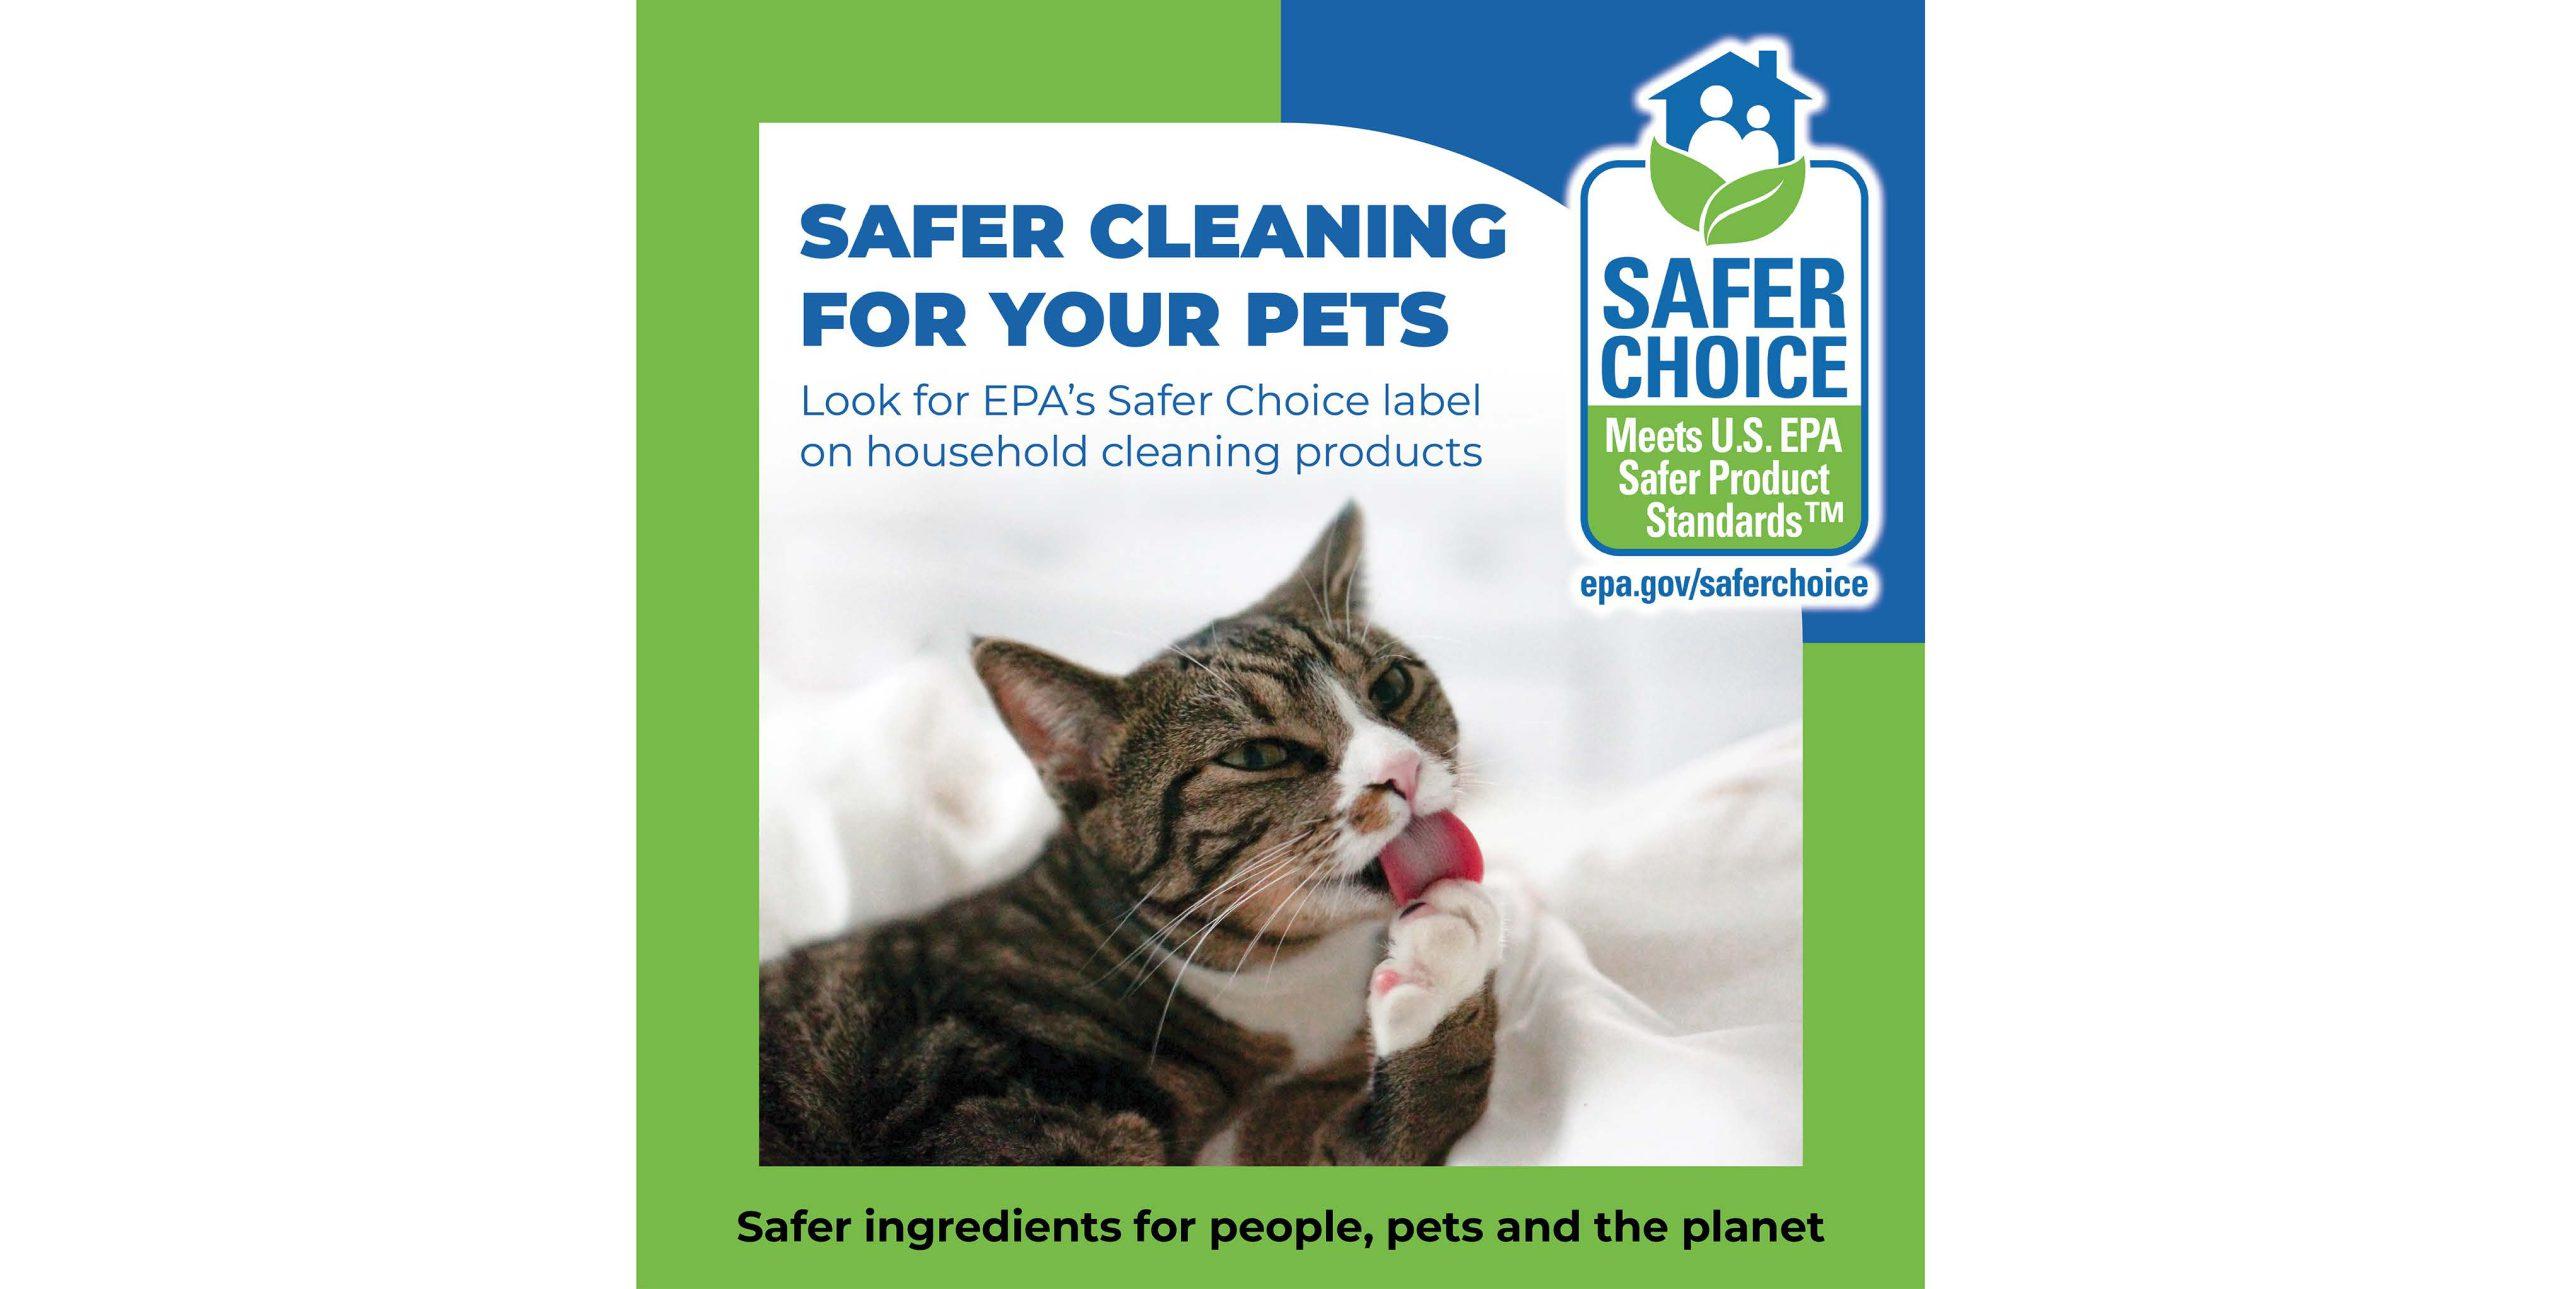 image of a cat licking it's paw on an EPA pesticide label for Safer Choice pesticides.